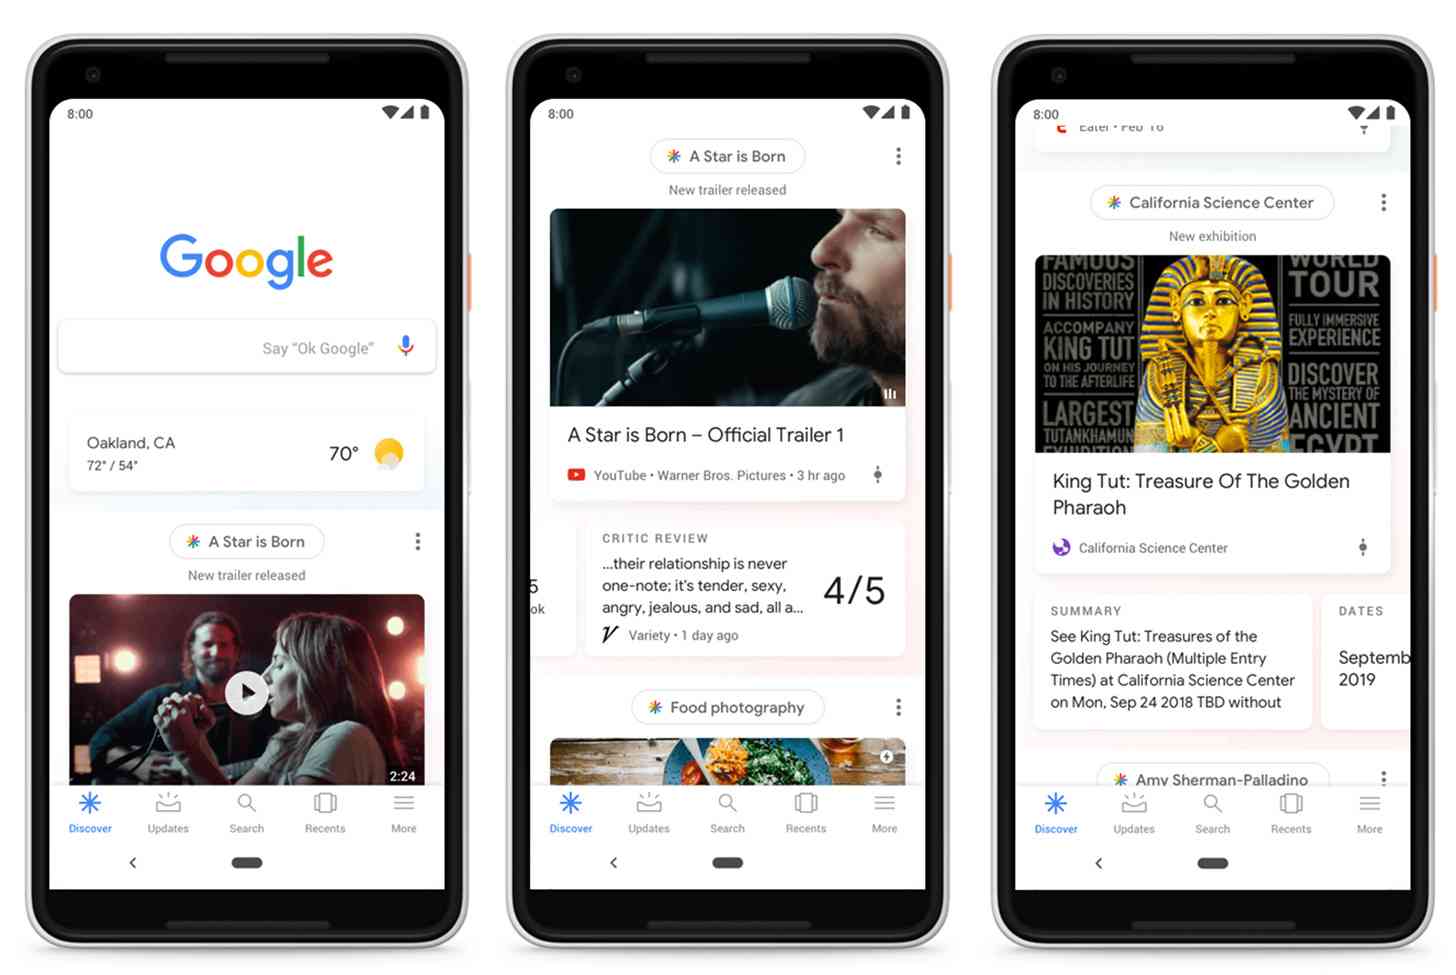 Google Discover feed